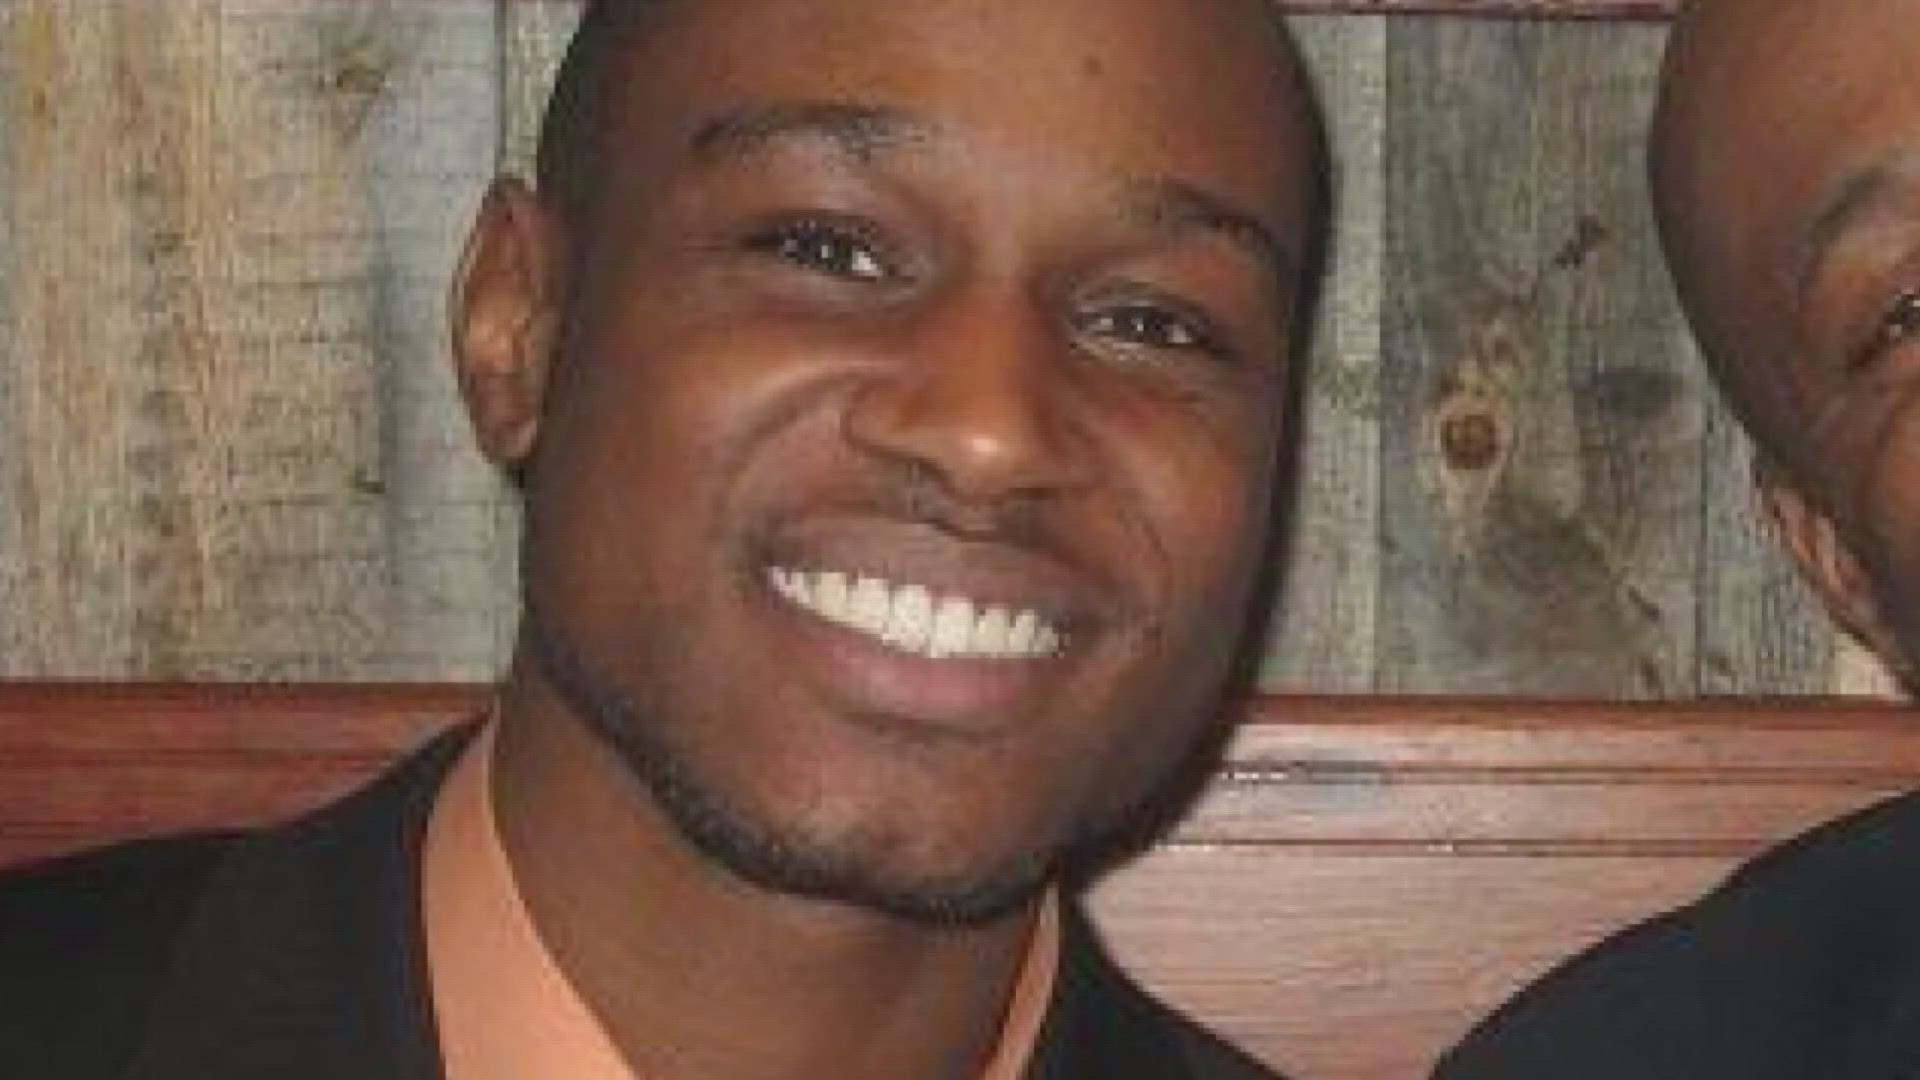 Halton was shot and killed while waiting for a bus near the intersection of Lakeshore Boulevard and Grovewood Avenue on Jan. 11, 2014. His murder remains unsolved.